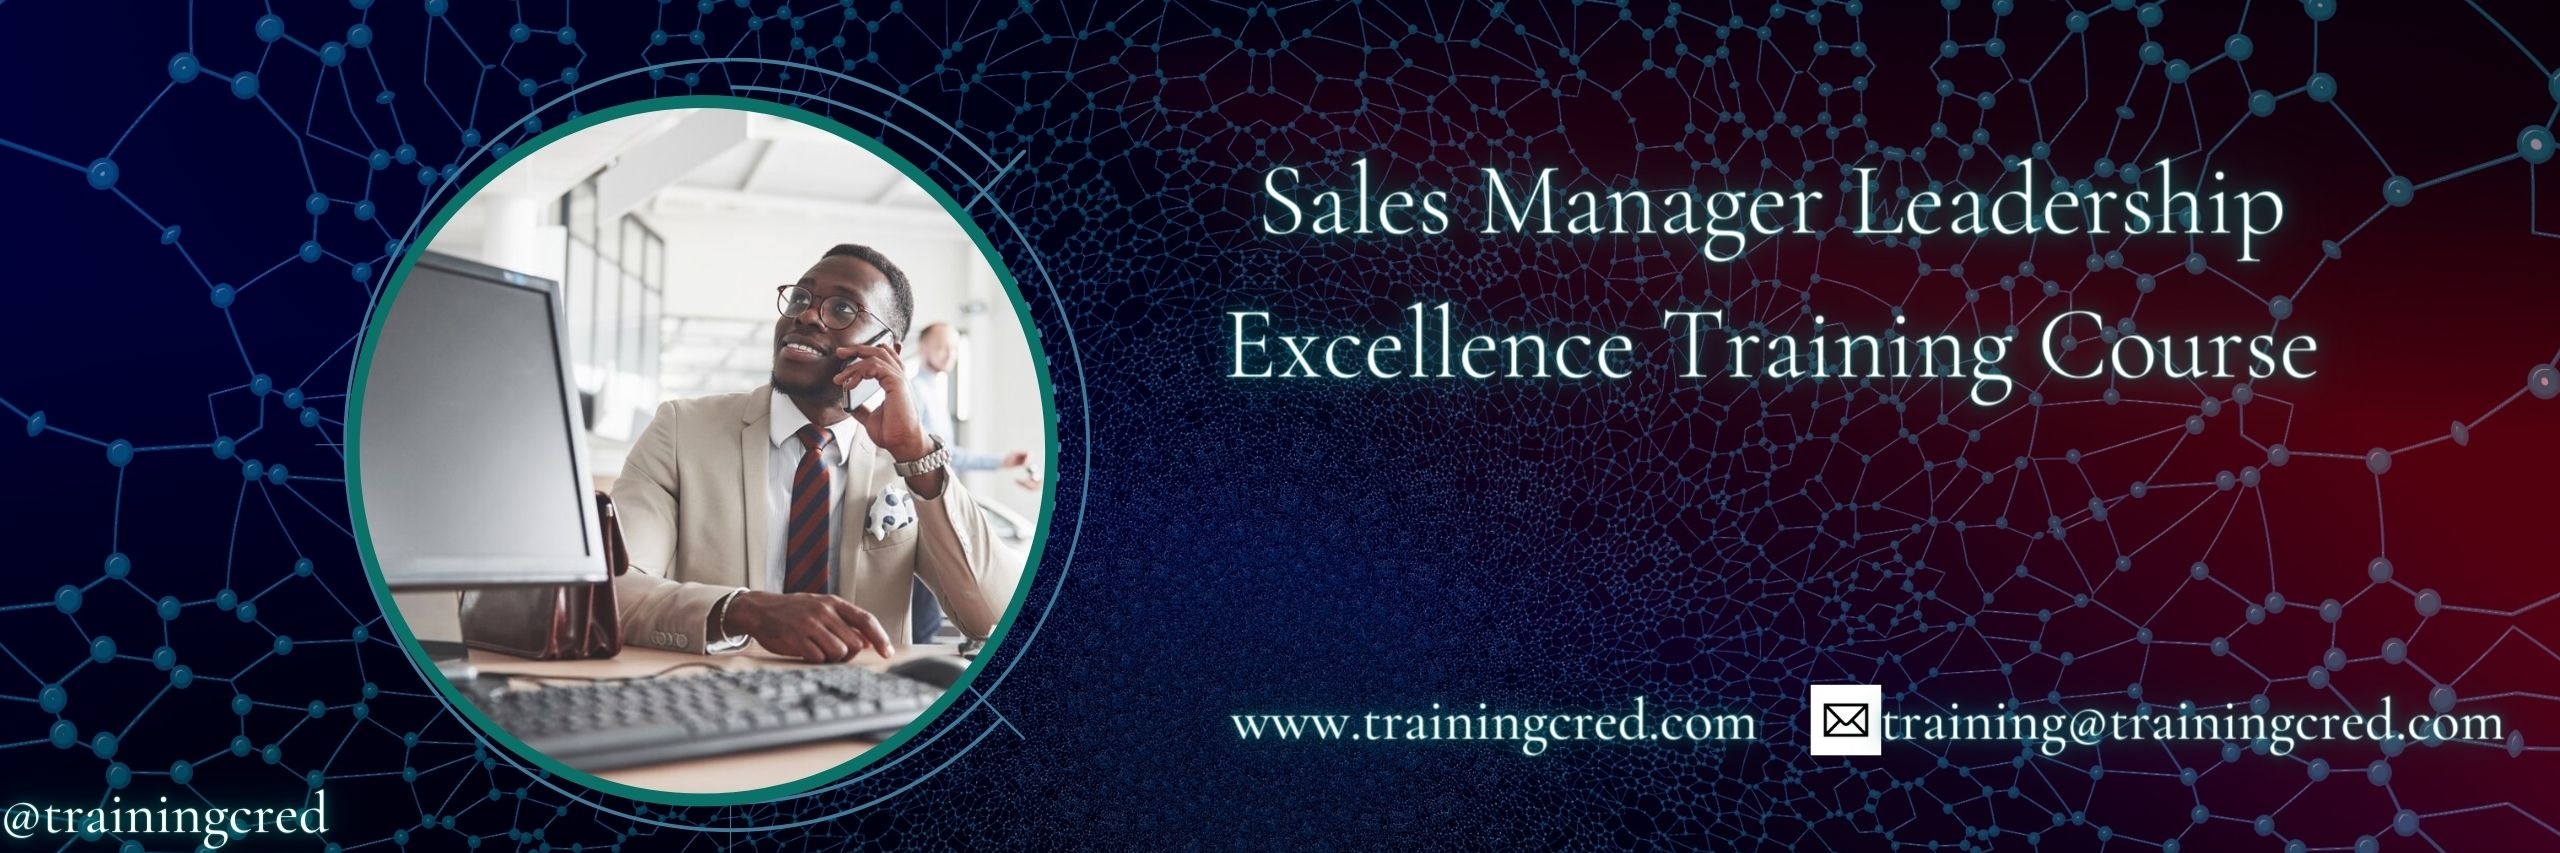 Sales Manager Leadership Excellence Training